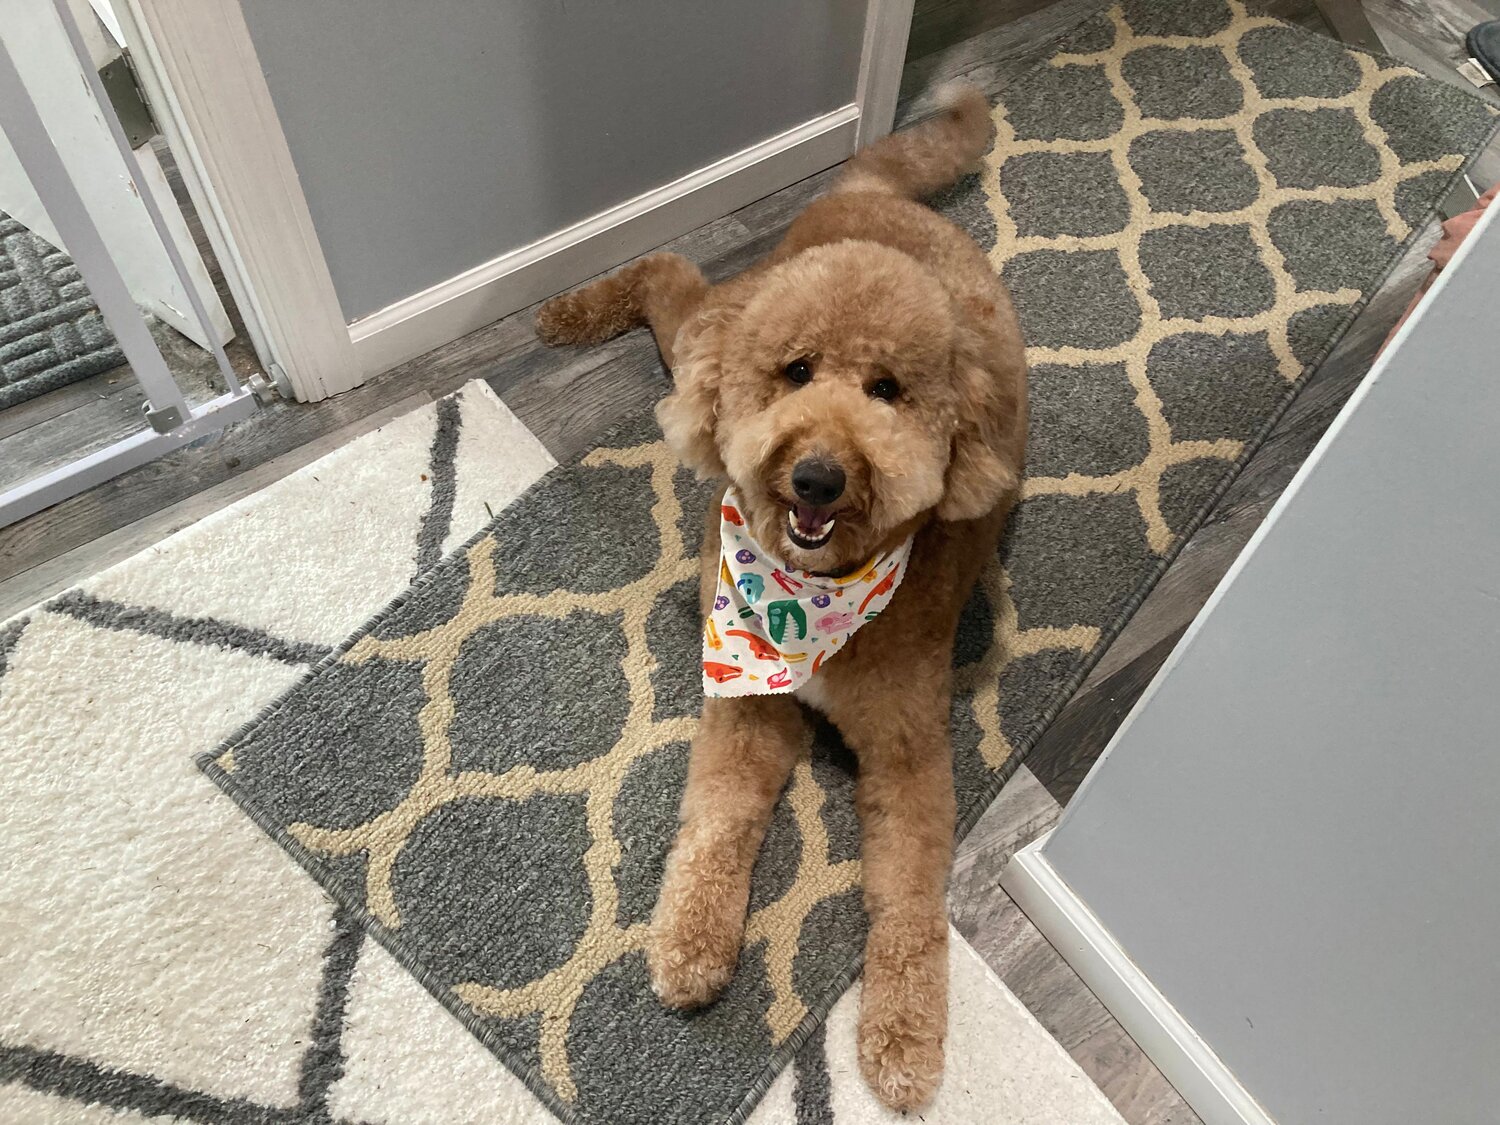 Toby the goldendoodle and his Pet Partners crew visit nursing homes, assisted-living centers, veterans’ homes, schools, colleges, and summer camps for children with life-threatening illnesses.